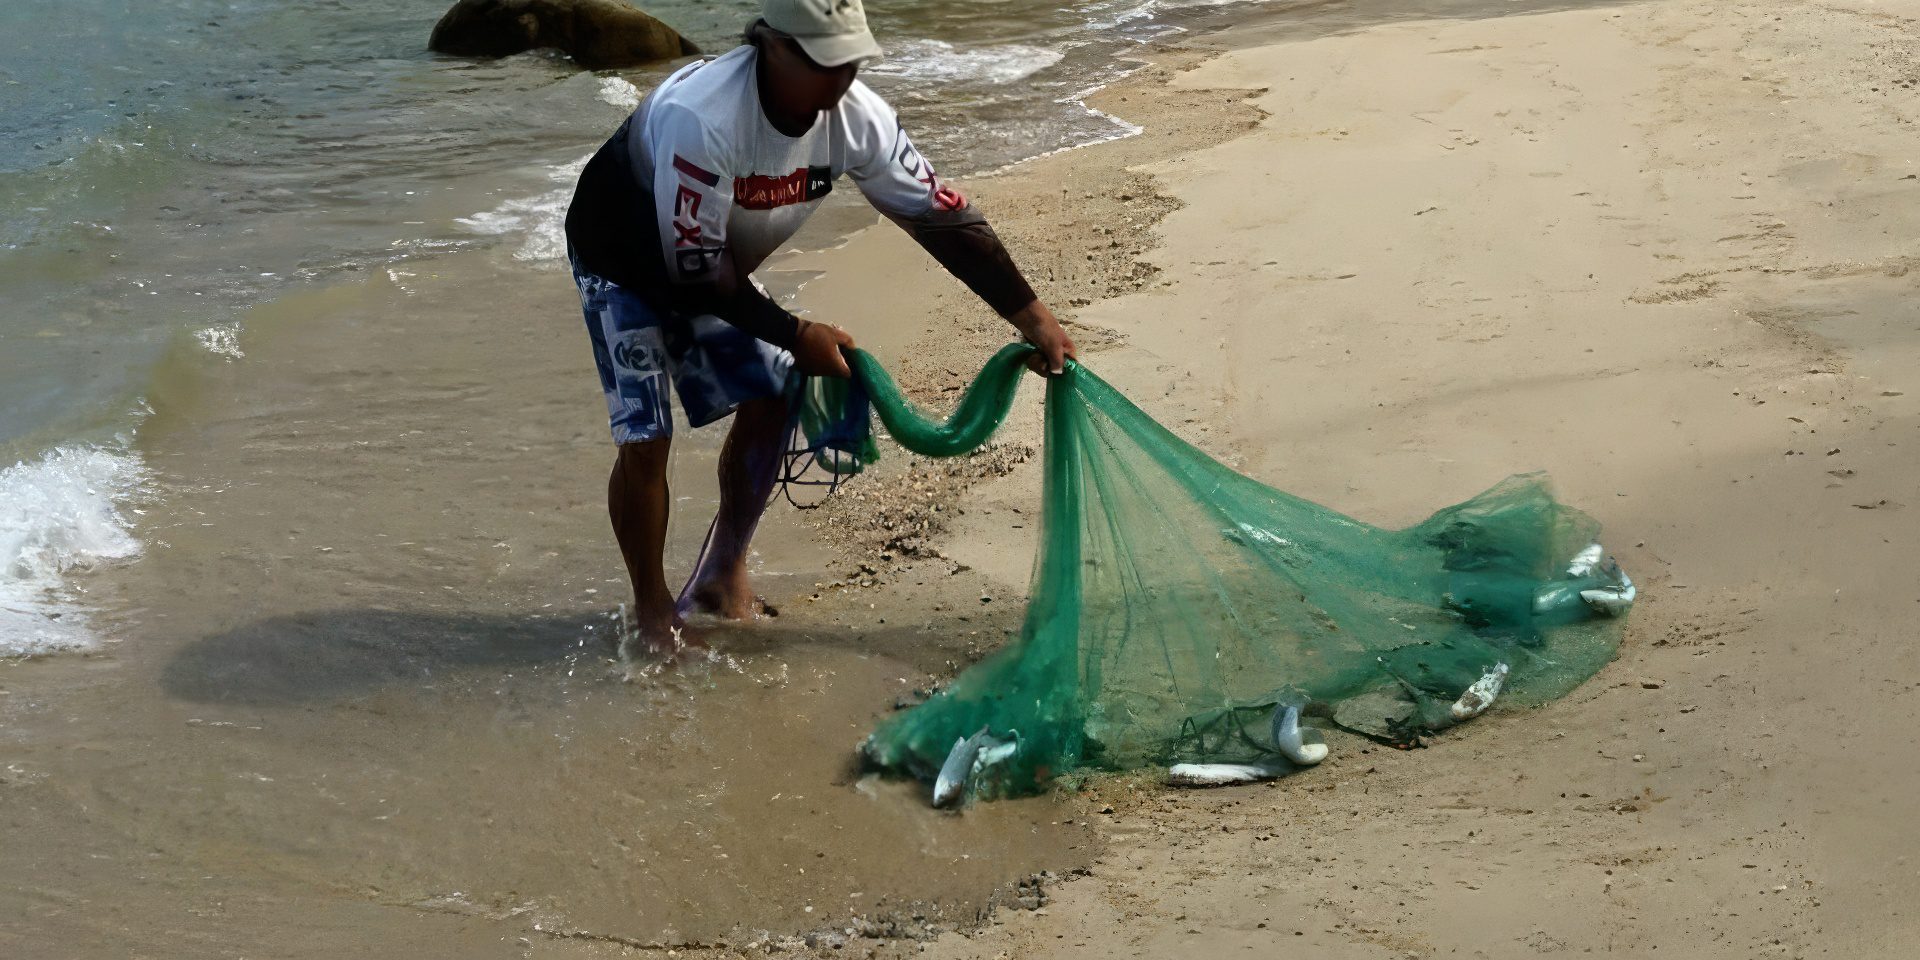 New Experience of Cast Fishing Nets is Available for Tourists in